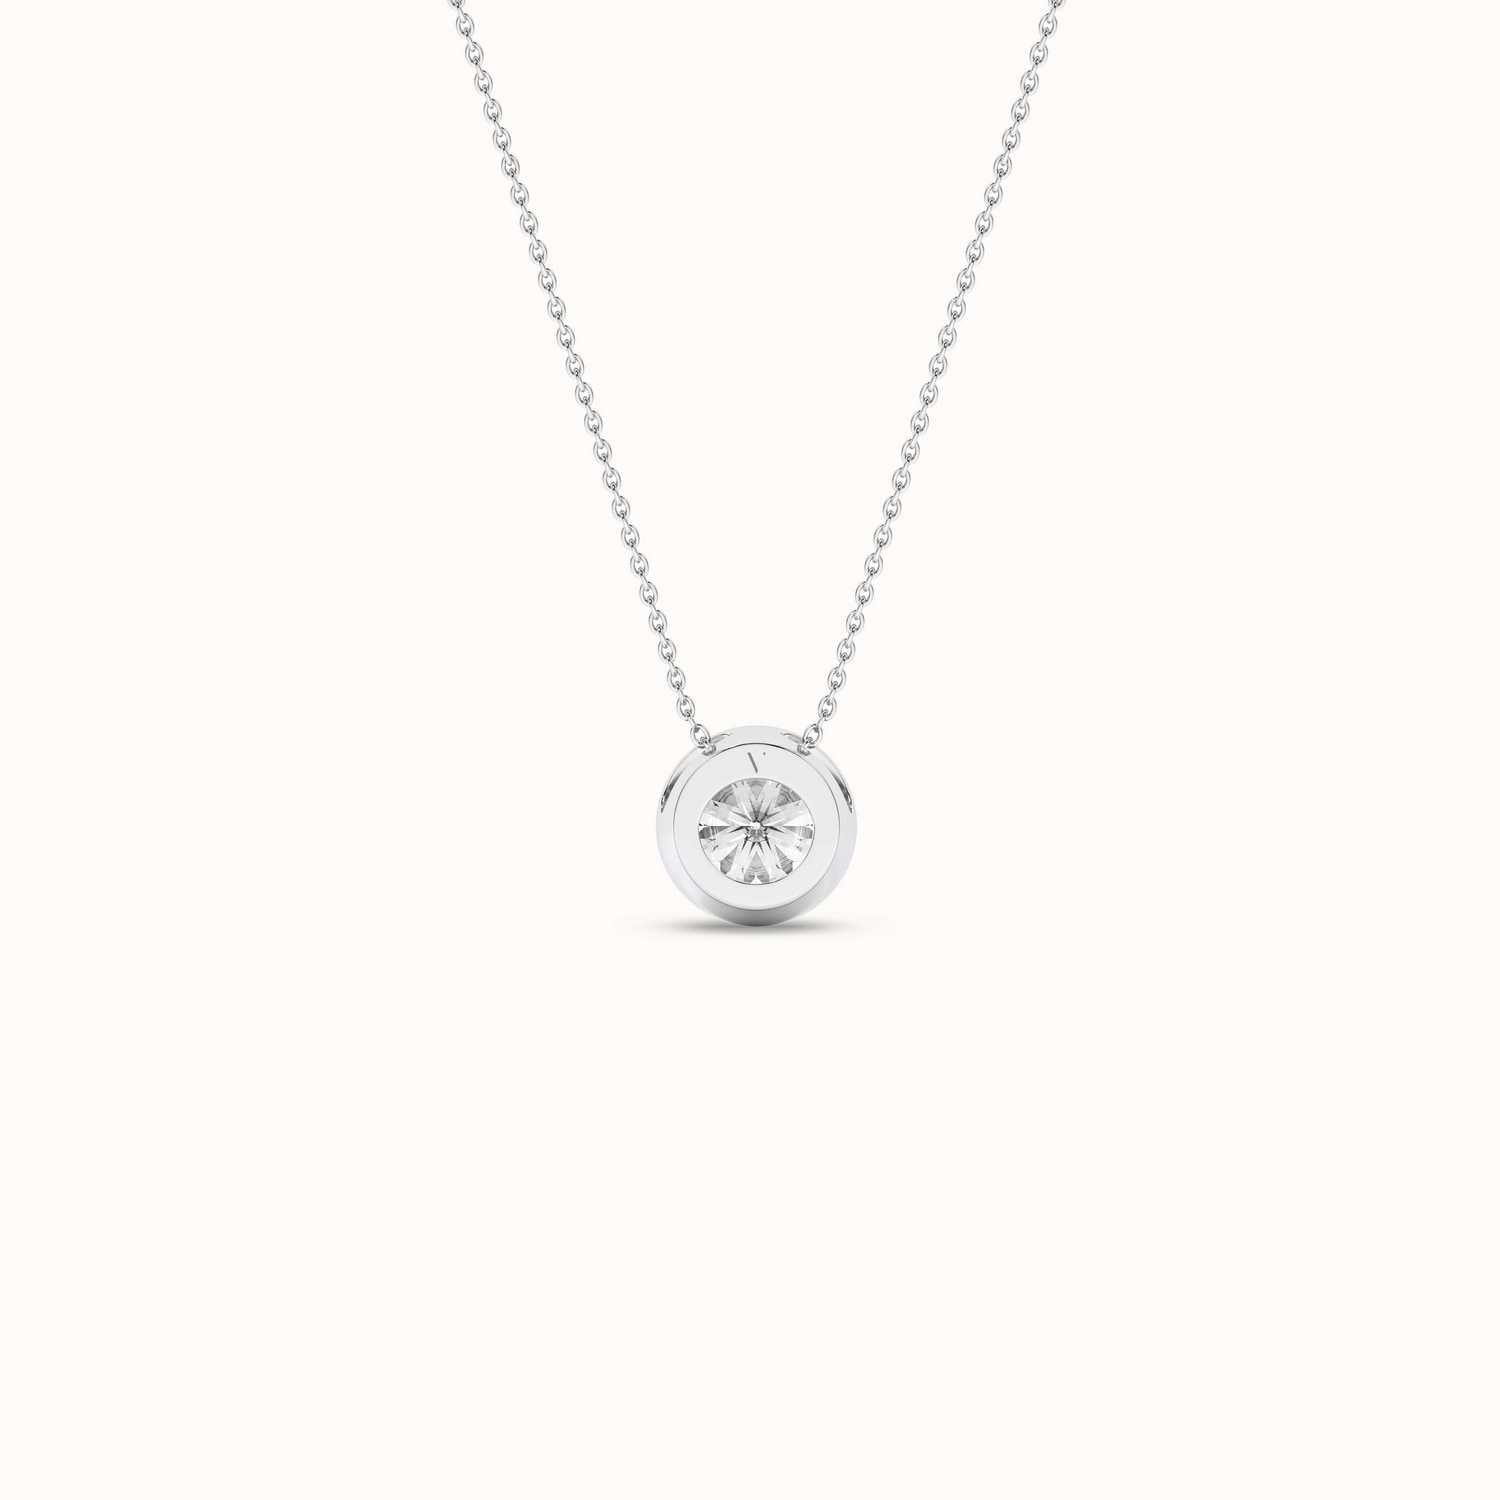 Encompassing Round Necklace_Product Angle_1/3Ct. - 3